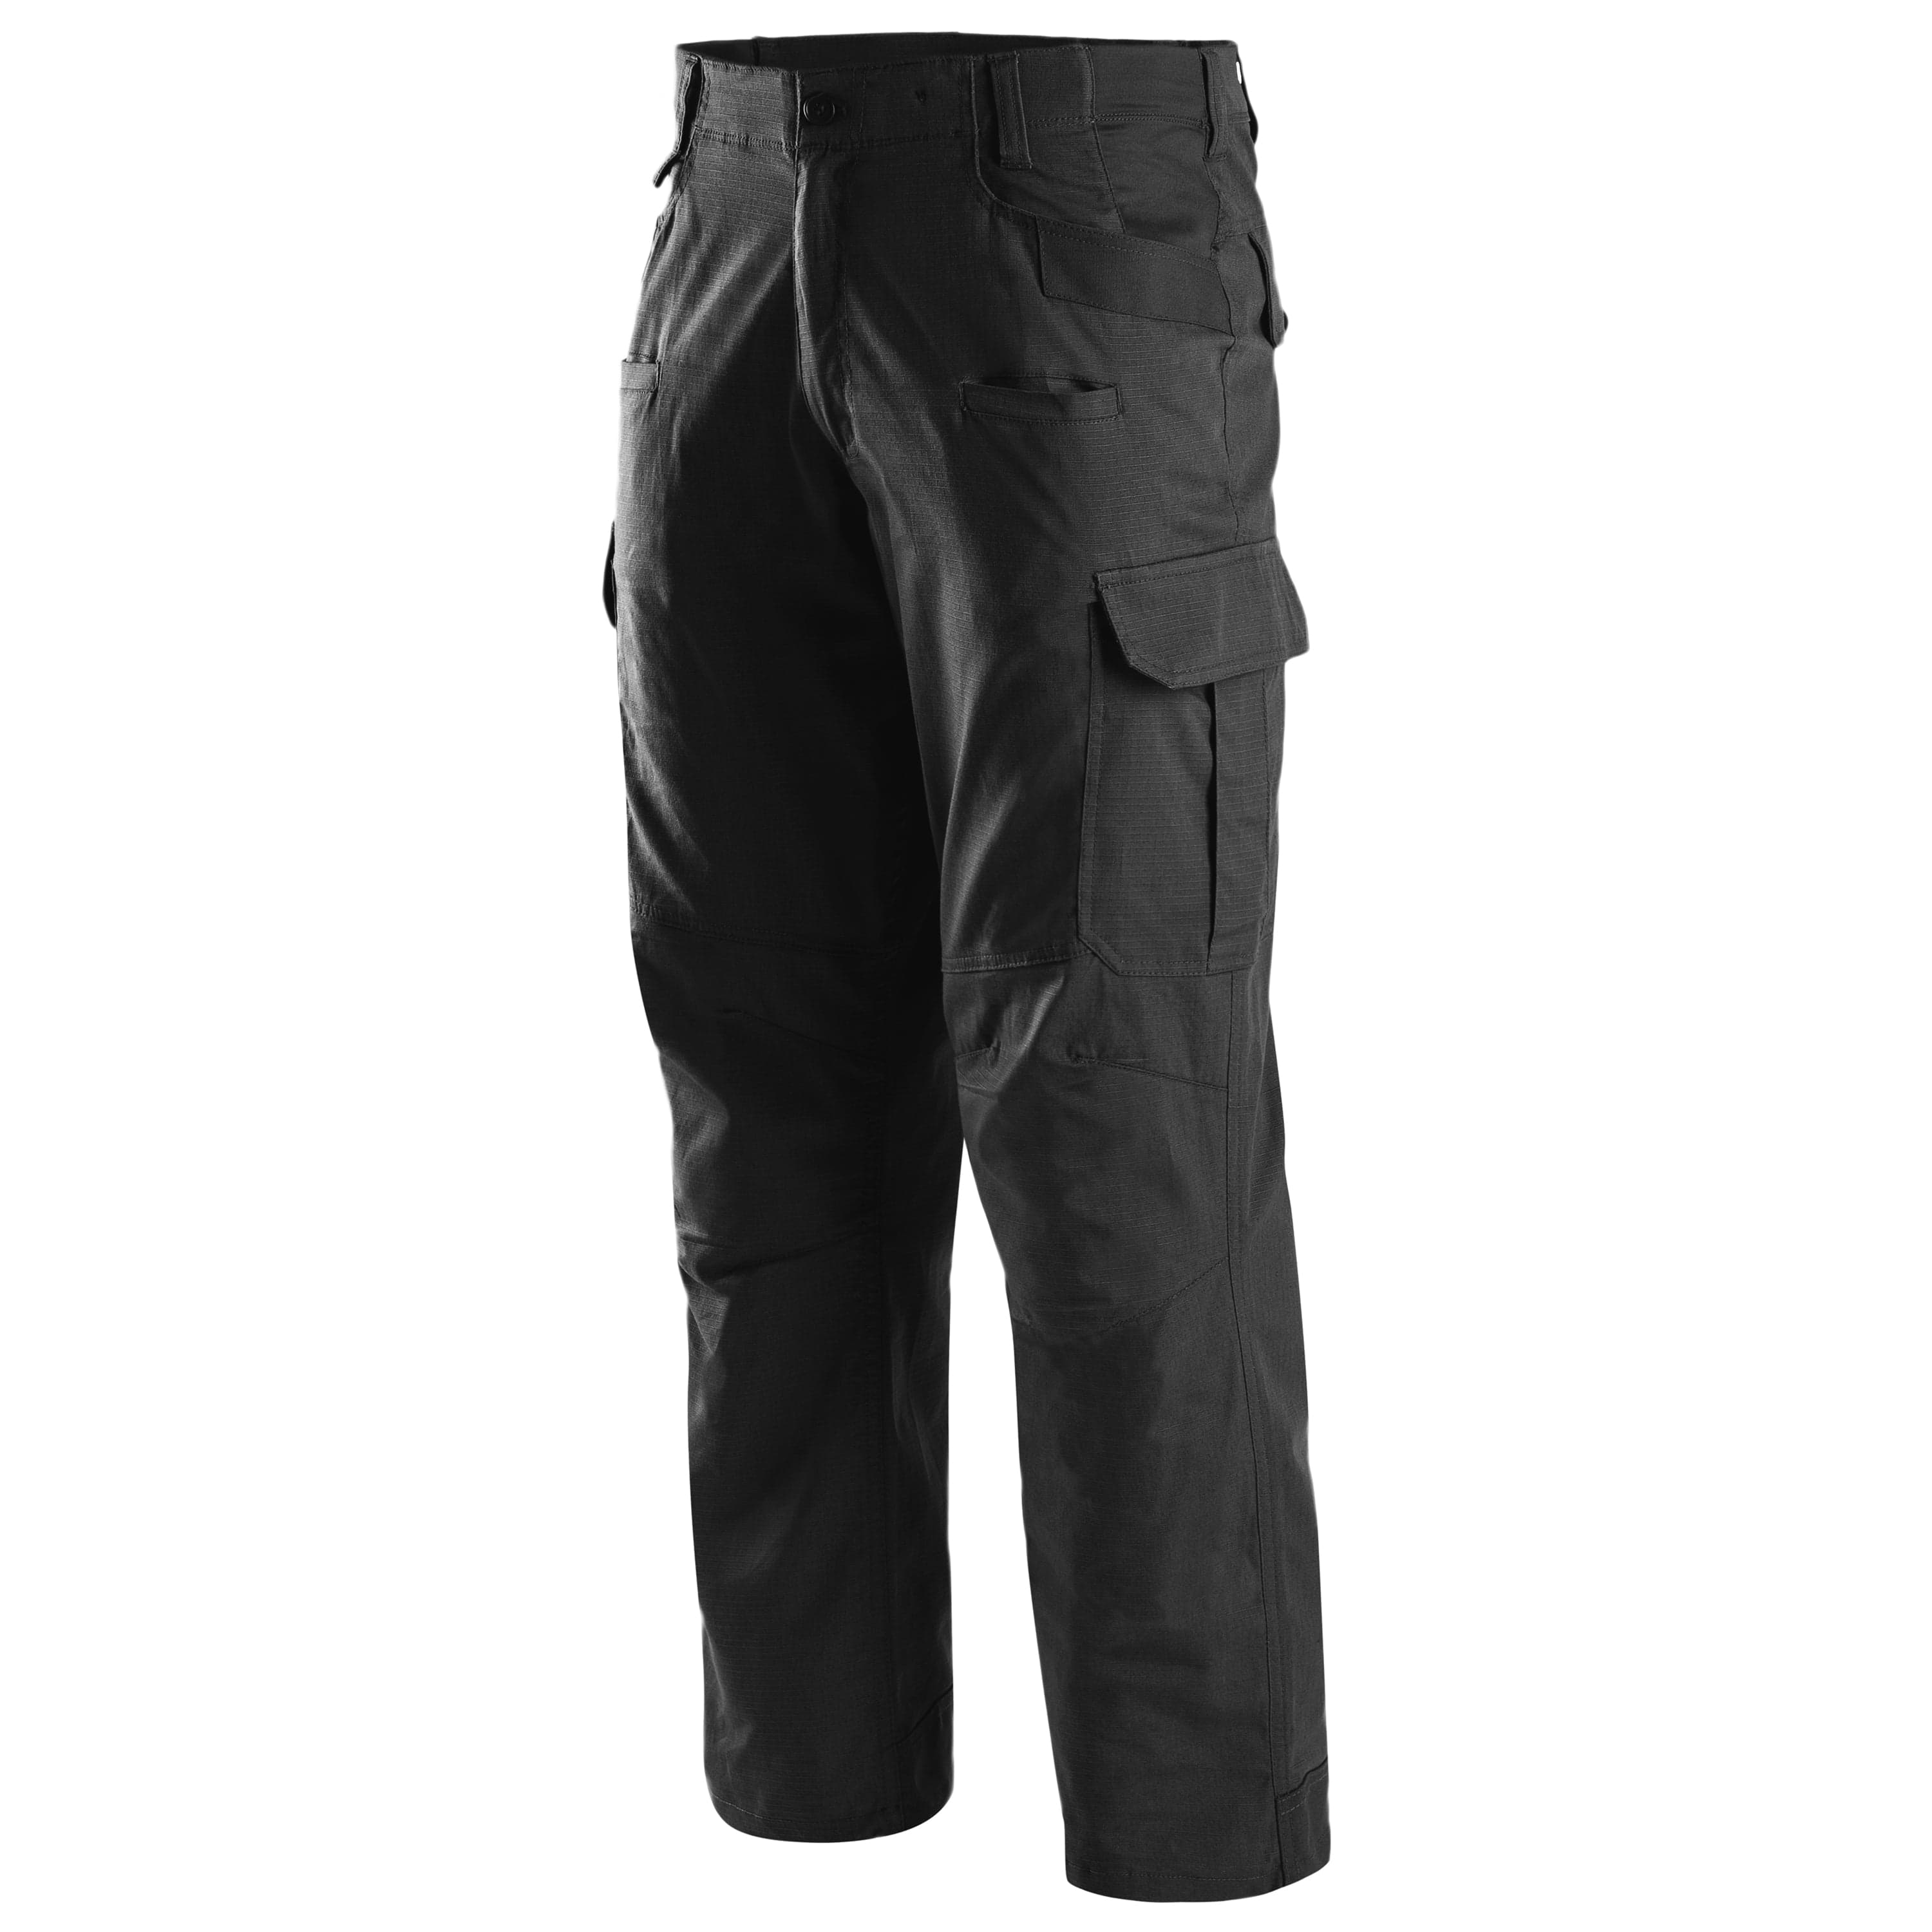 Highlander STOIRM Tactical Trousers Black – Patrol Store